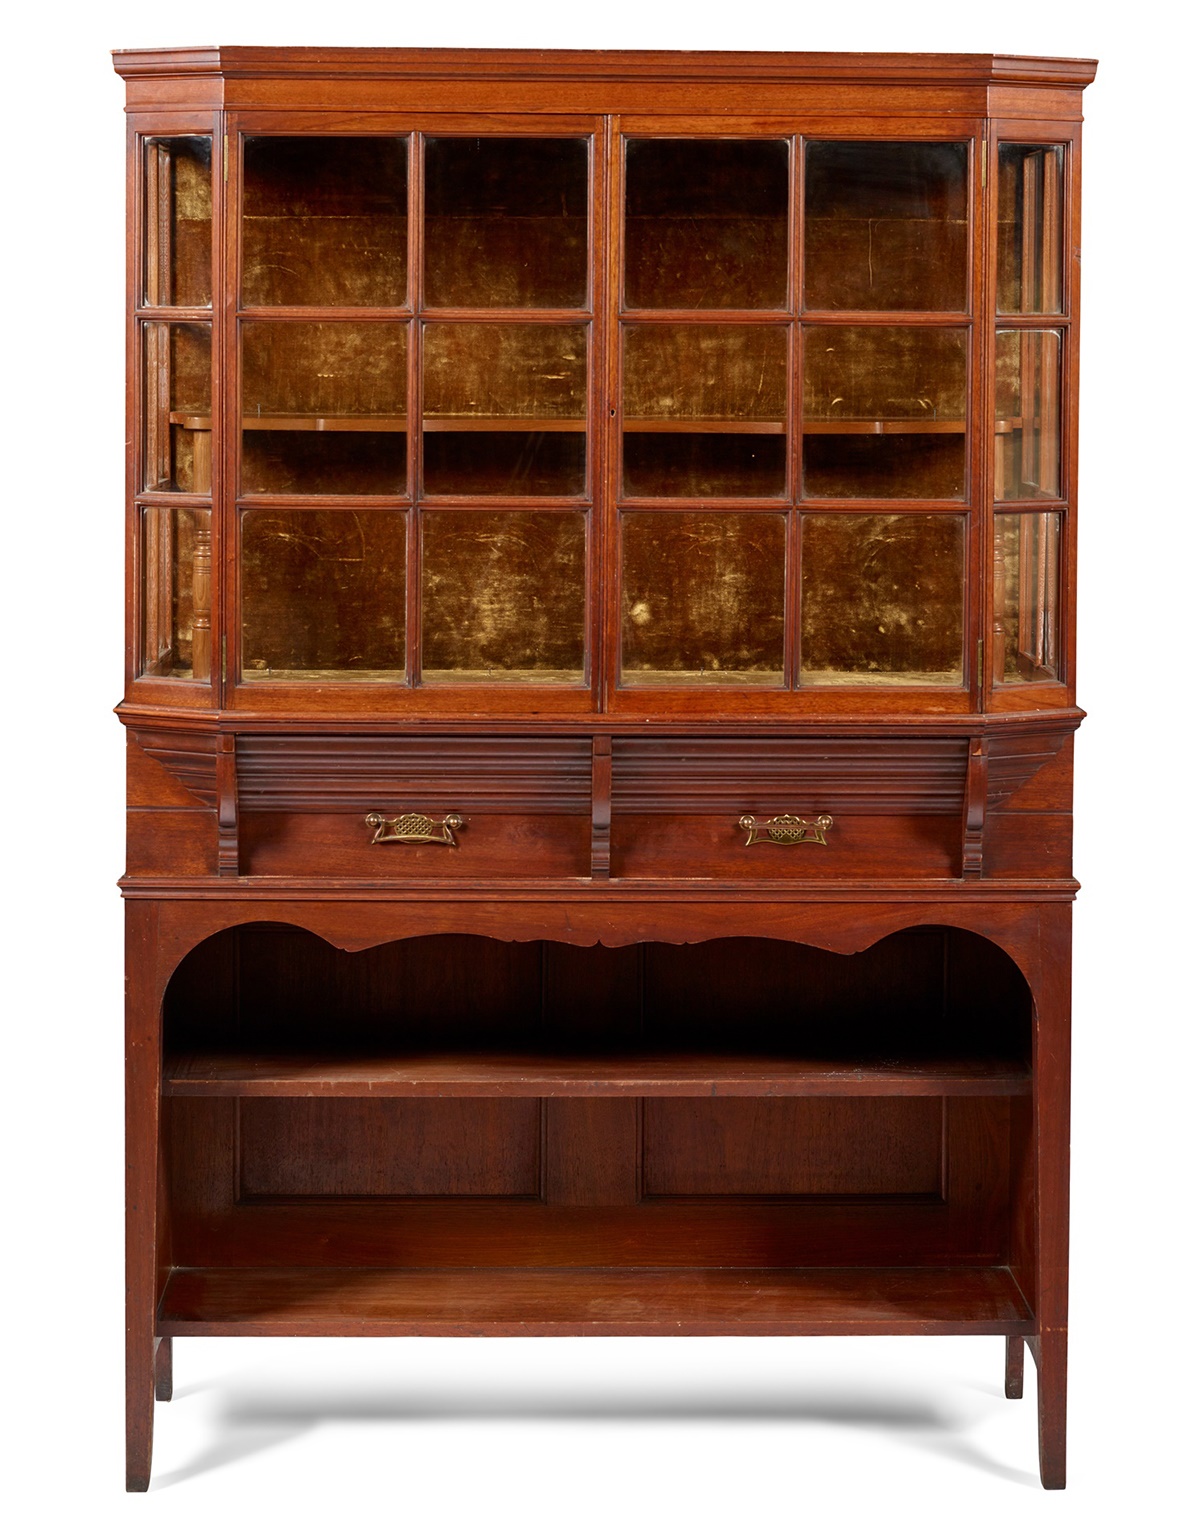 LOT 192 | PHILIP WEBB (1831-1915) (ATTRIBUTED DESIGNER) FOR MORRIS & CO. (ATTRIBUTED MAKER) | ARTS & CRAFTS DISPLAY CABINET, CIRCA 1880 | £1,500 - £2,500 + fees